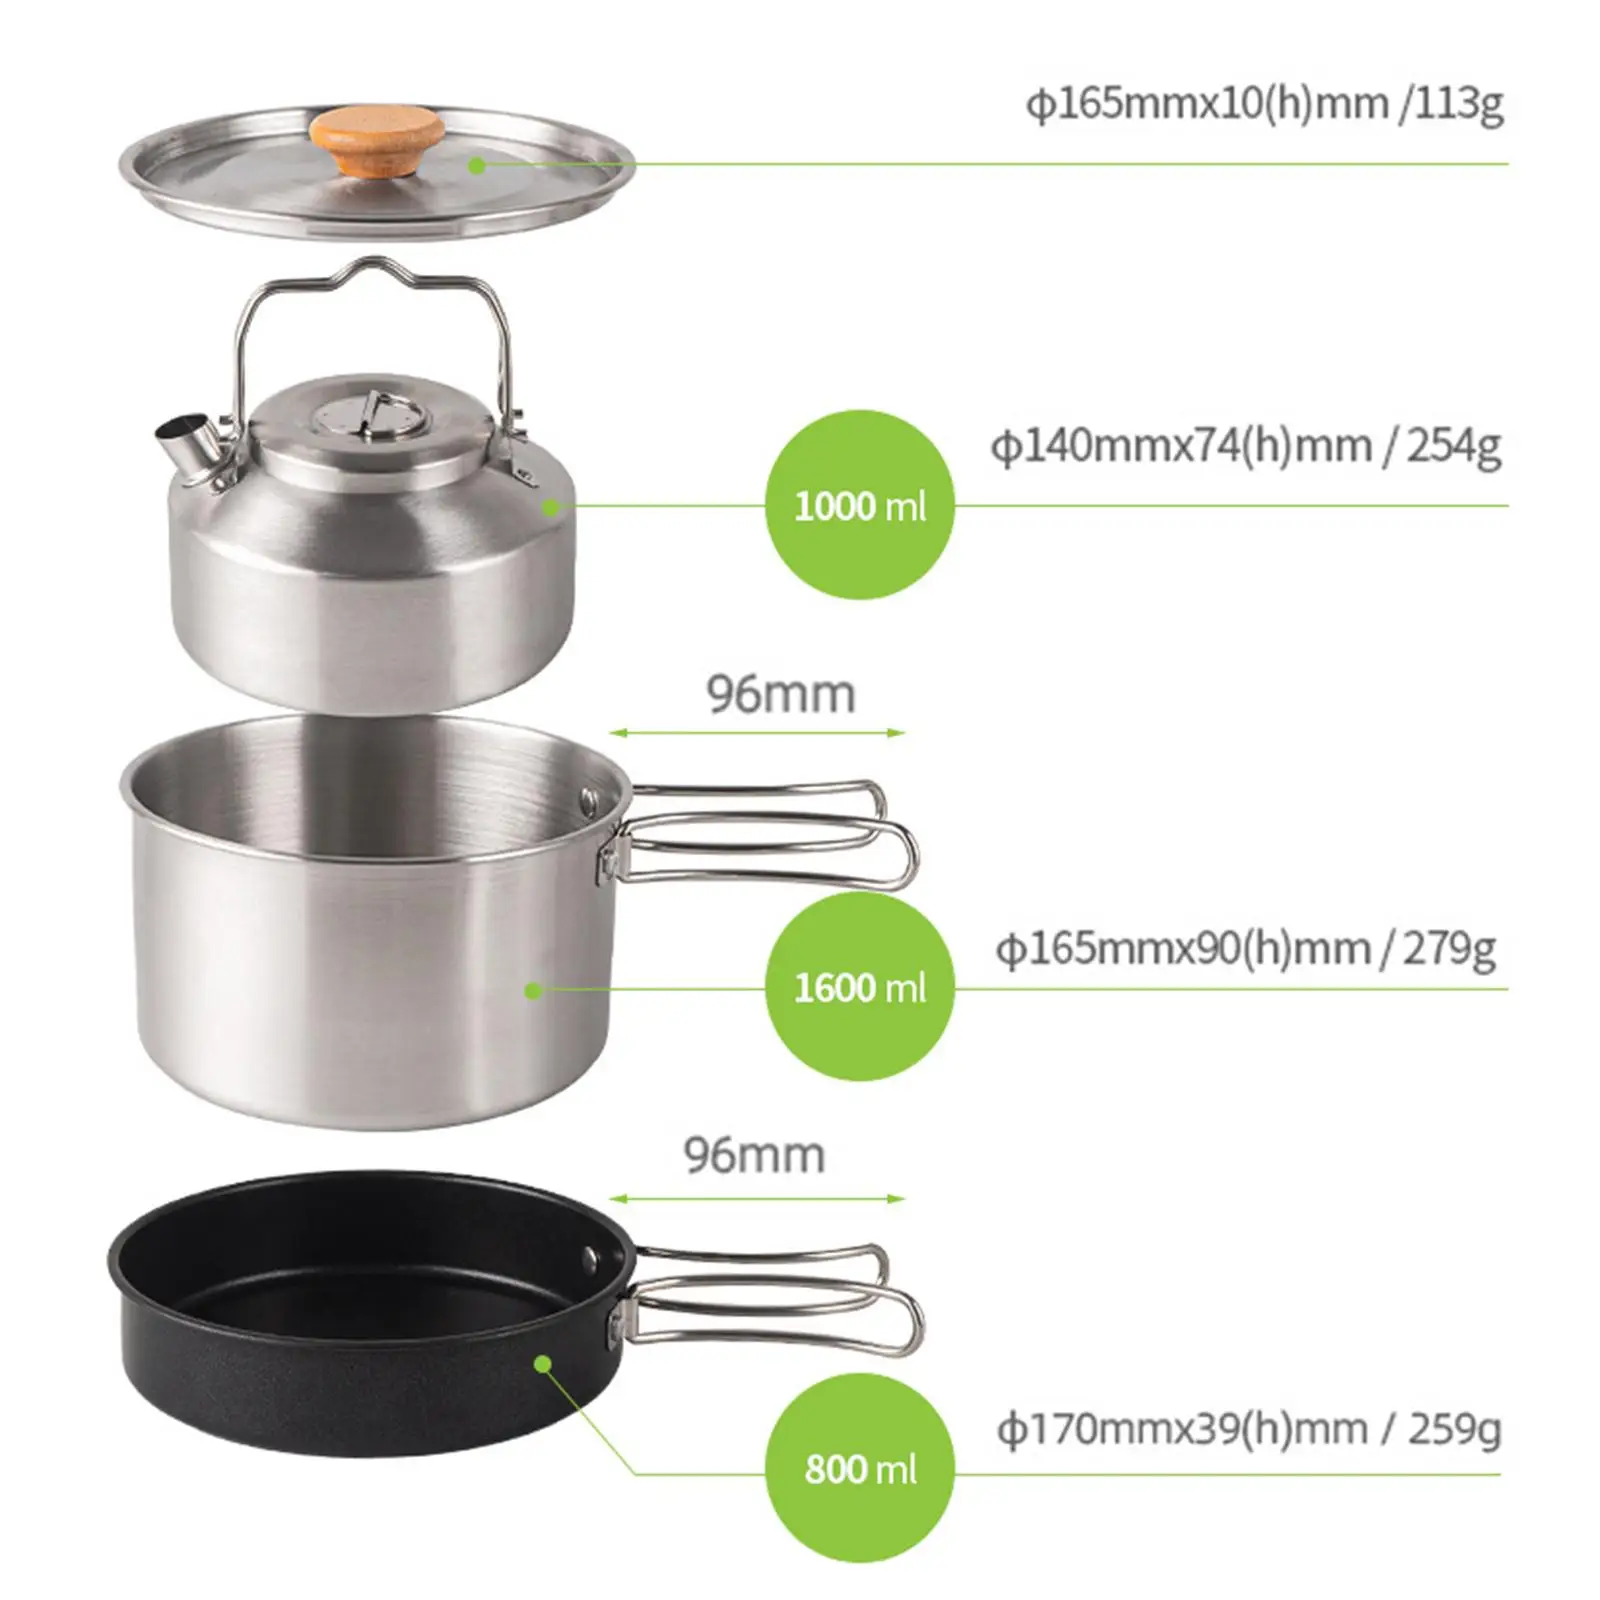 4 in1 Camping Cookware Set Stainless Steel Fry Pan Pot Kettle Cook Set Folding Cooking Set for Outdoor Hiking Picnic Fishing